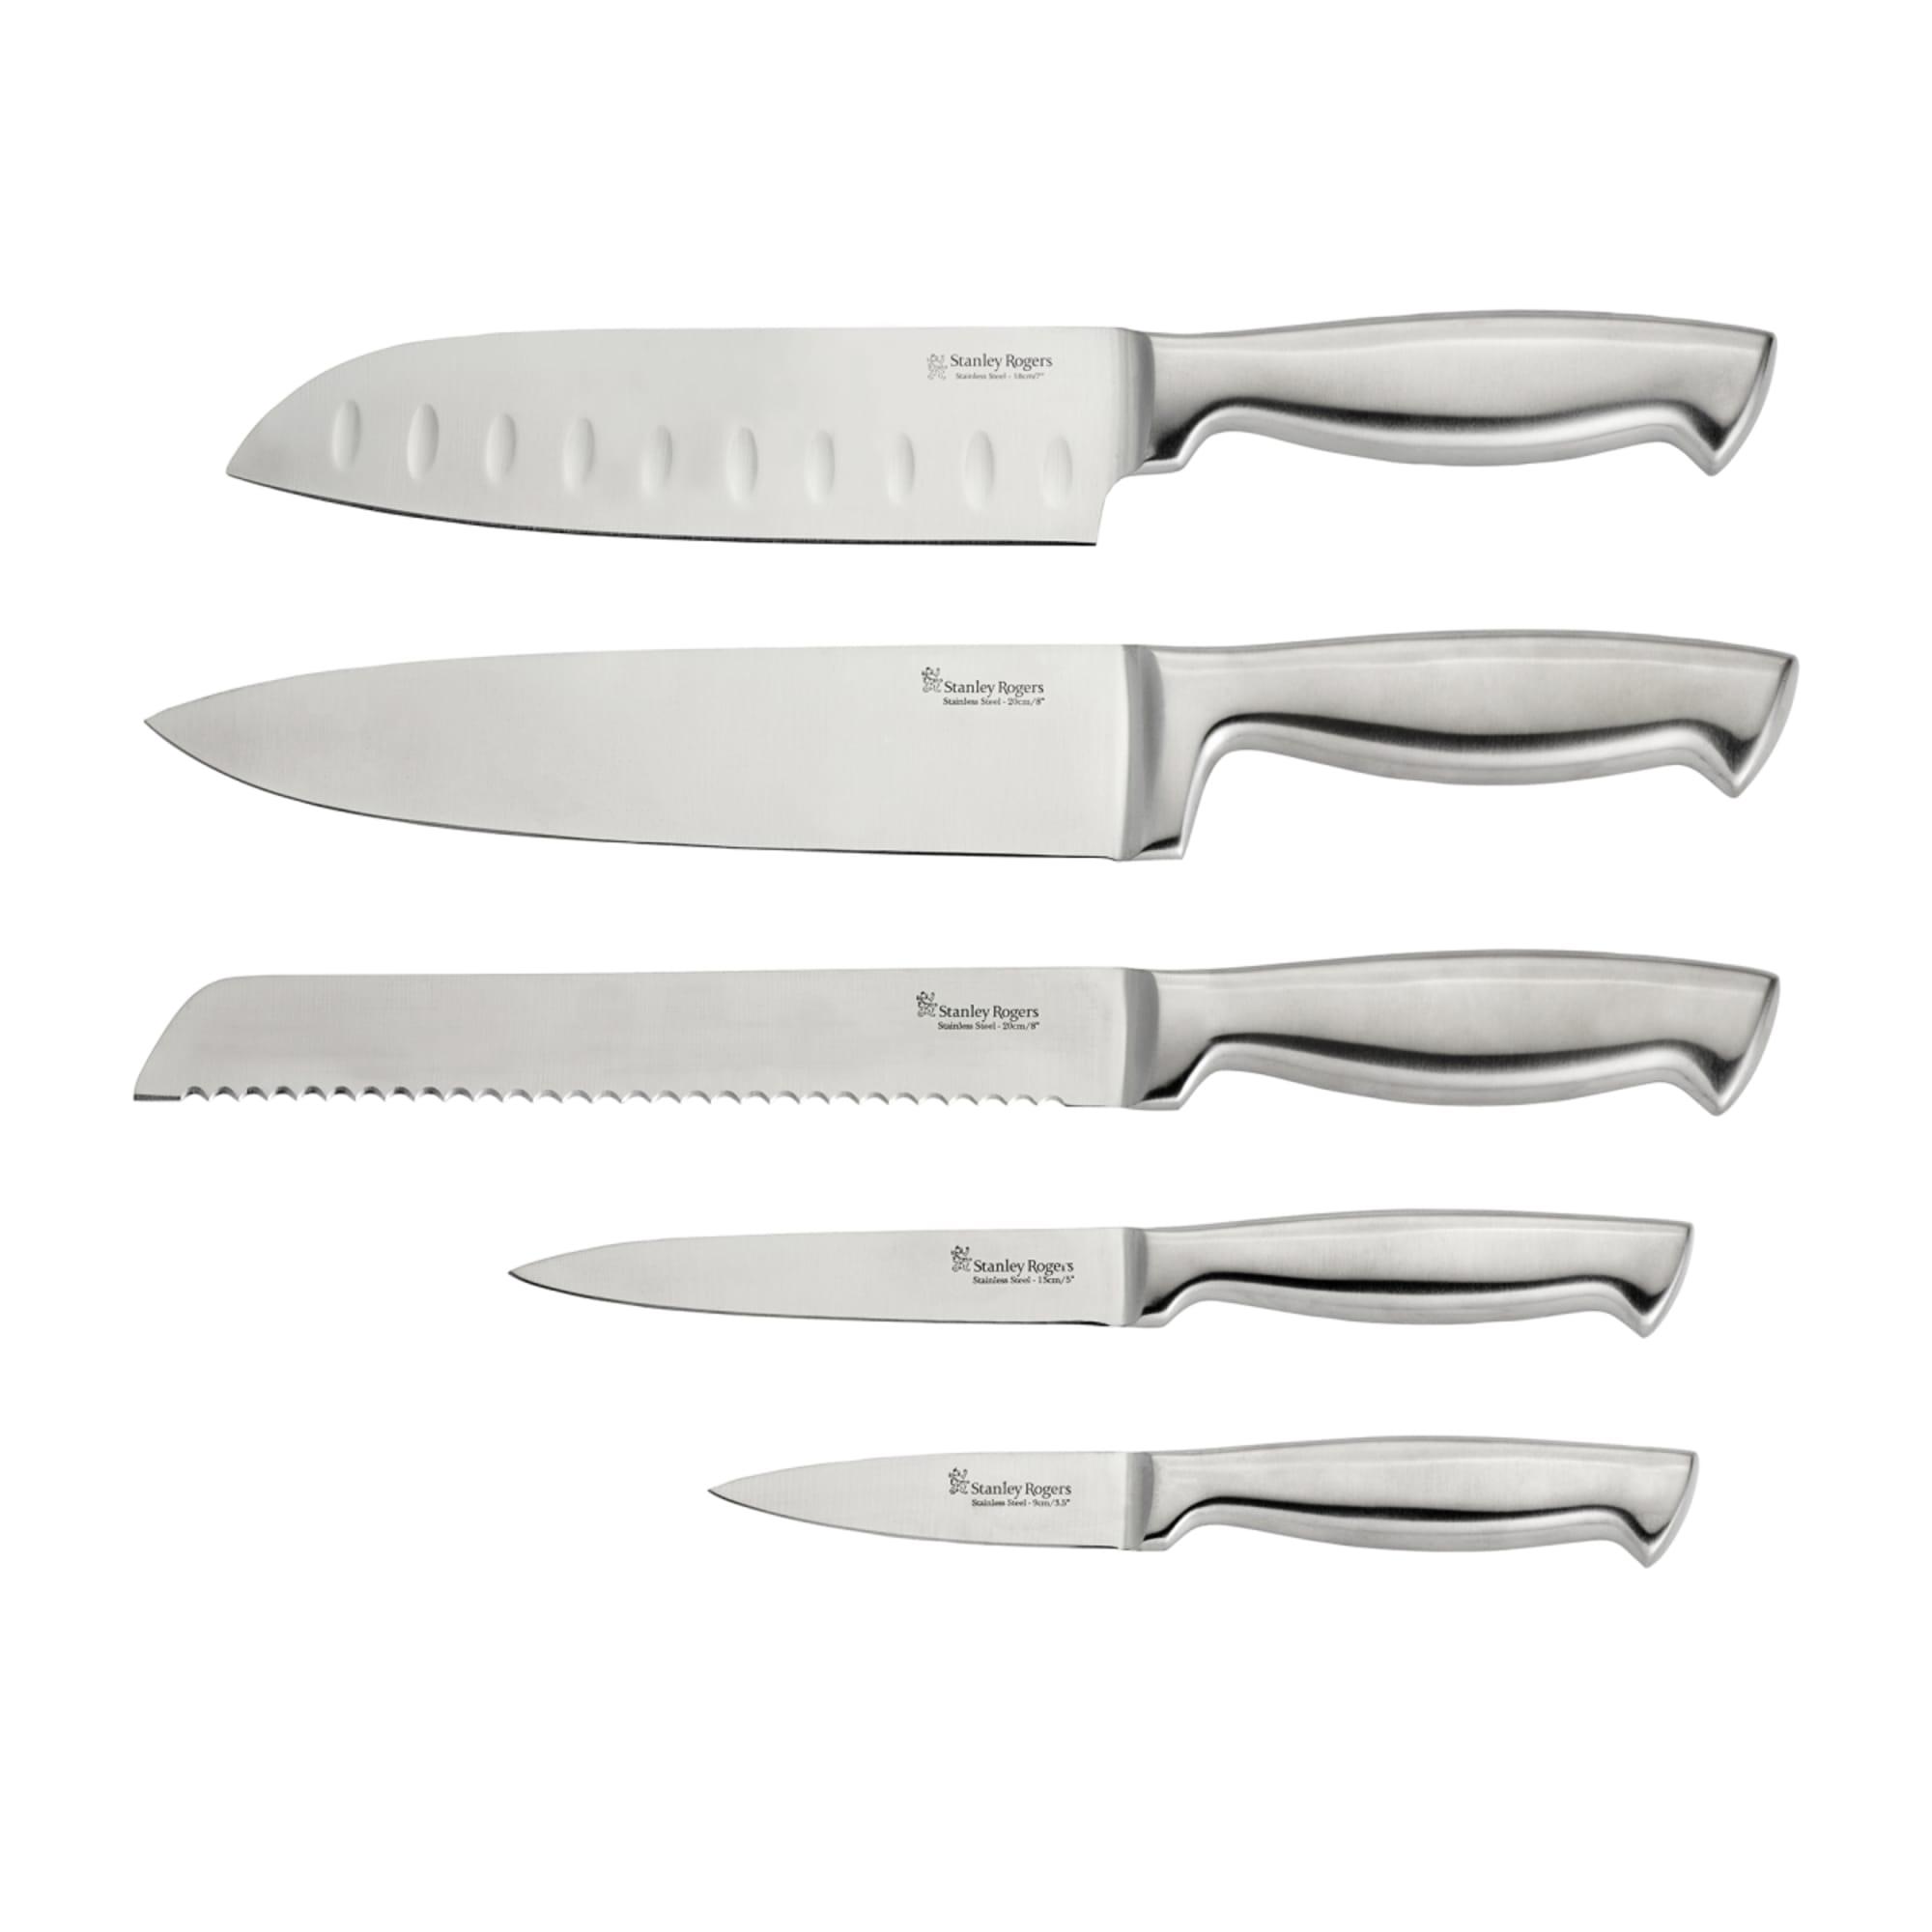 Stanley Rogers 6pc Magnetic Knife Block Set Image 3